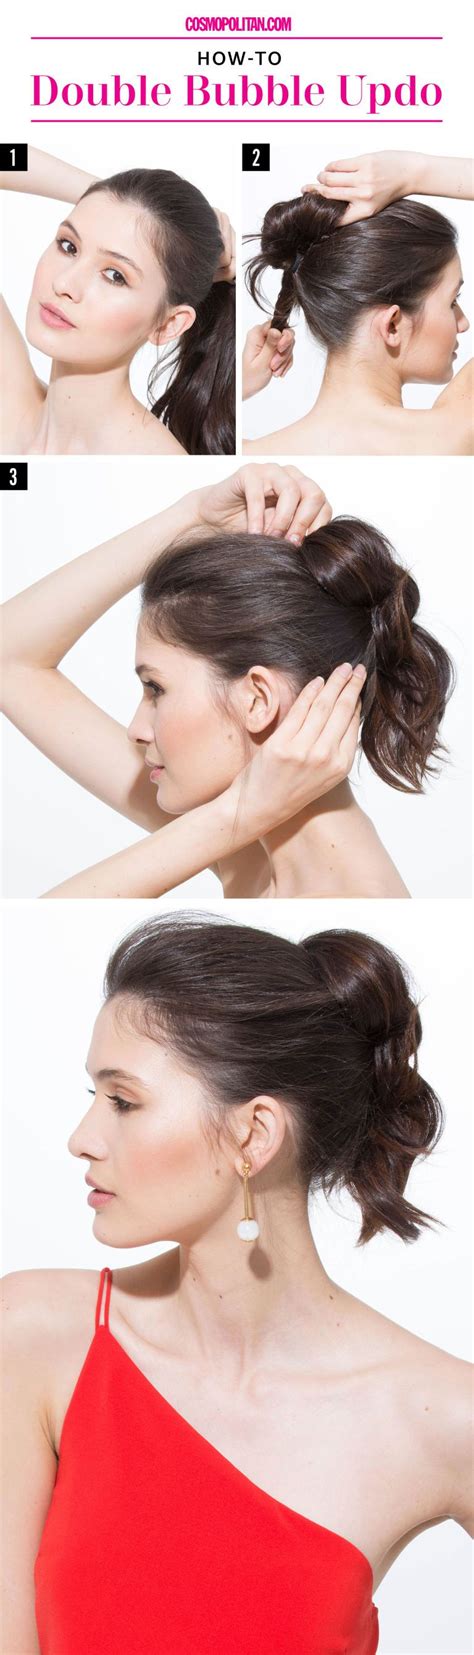 4 Last Minute Diy Evening Hairstyles That Will Leave You Looking Hot Af Evening Hairstyles